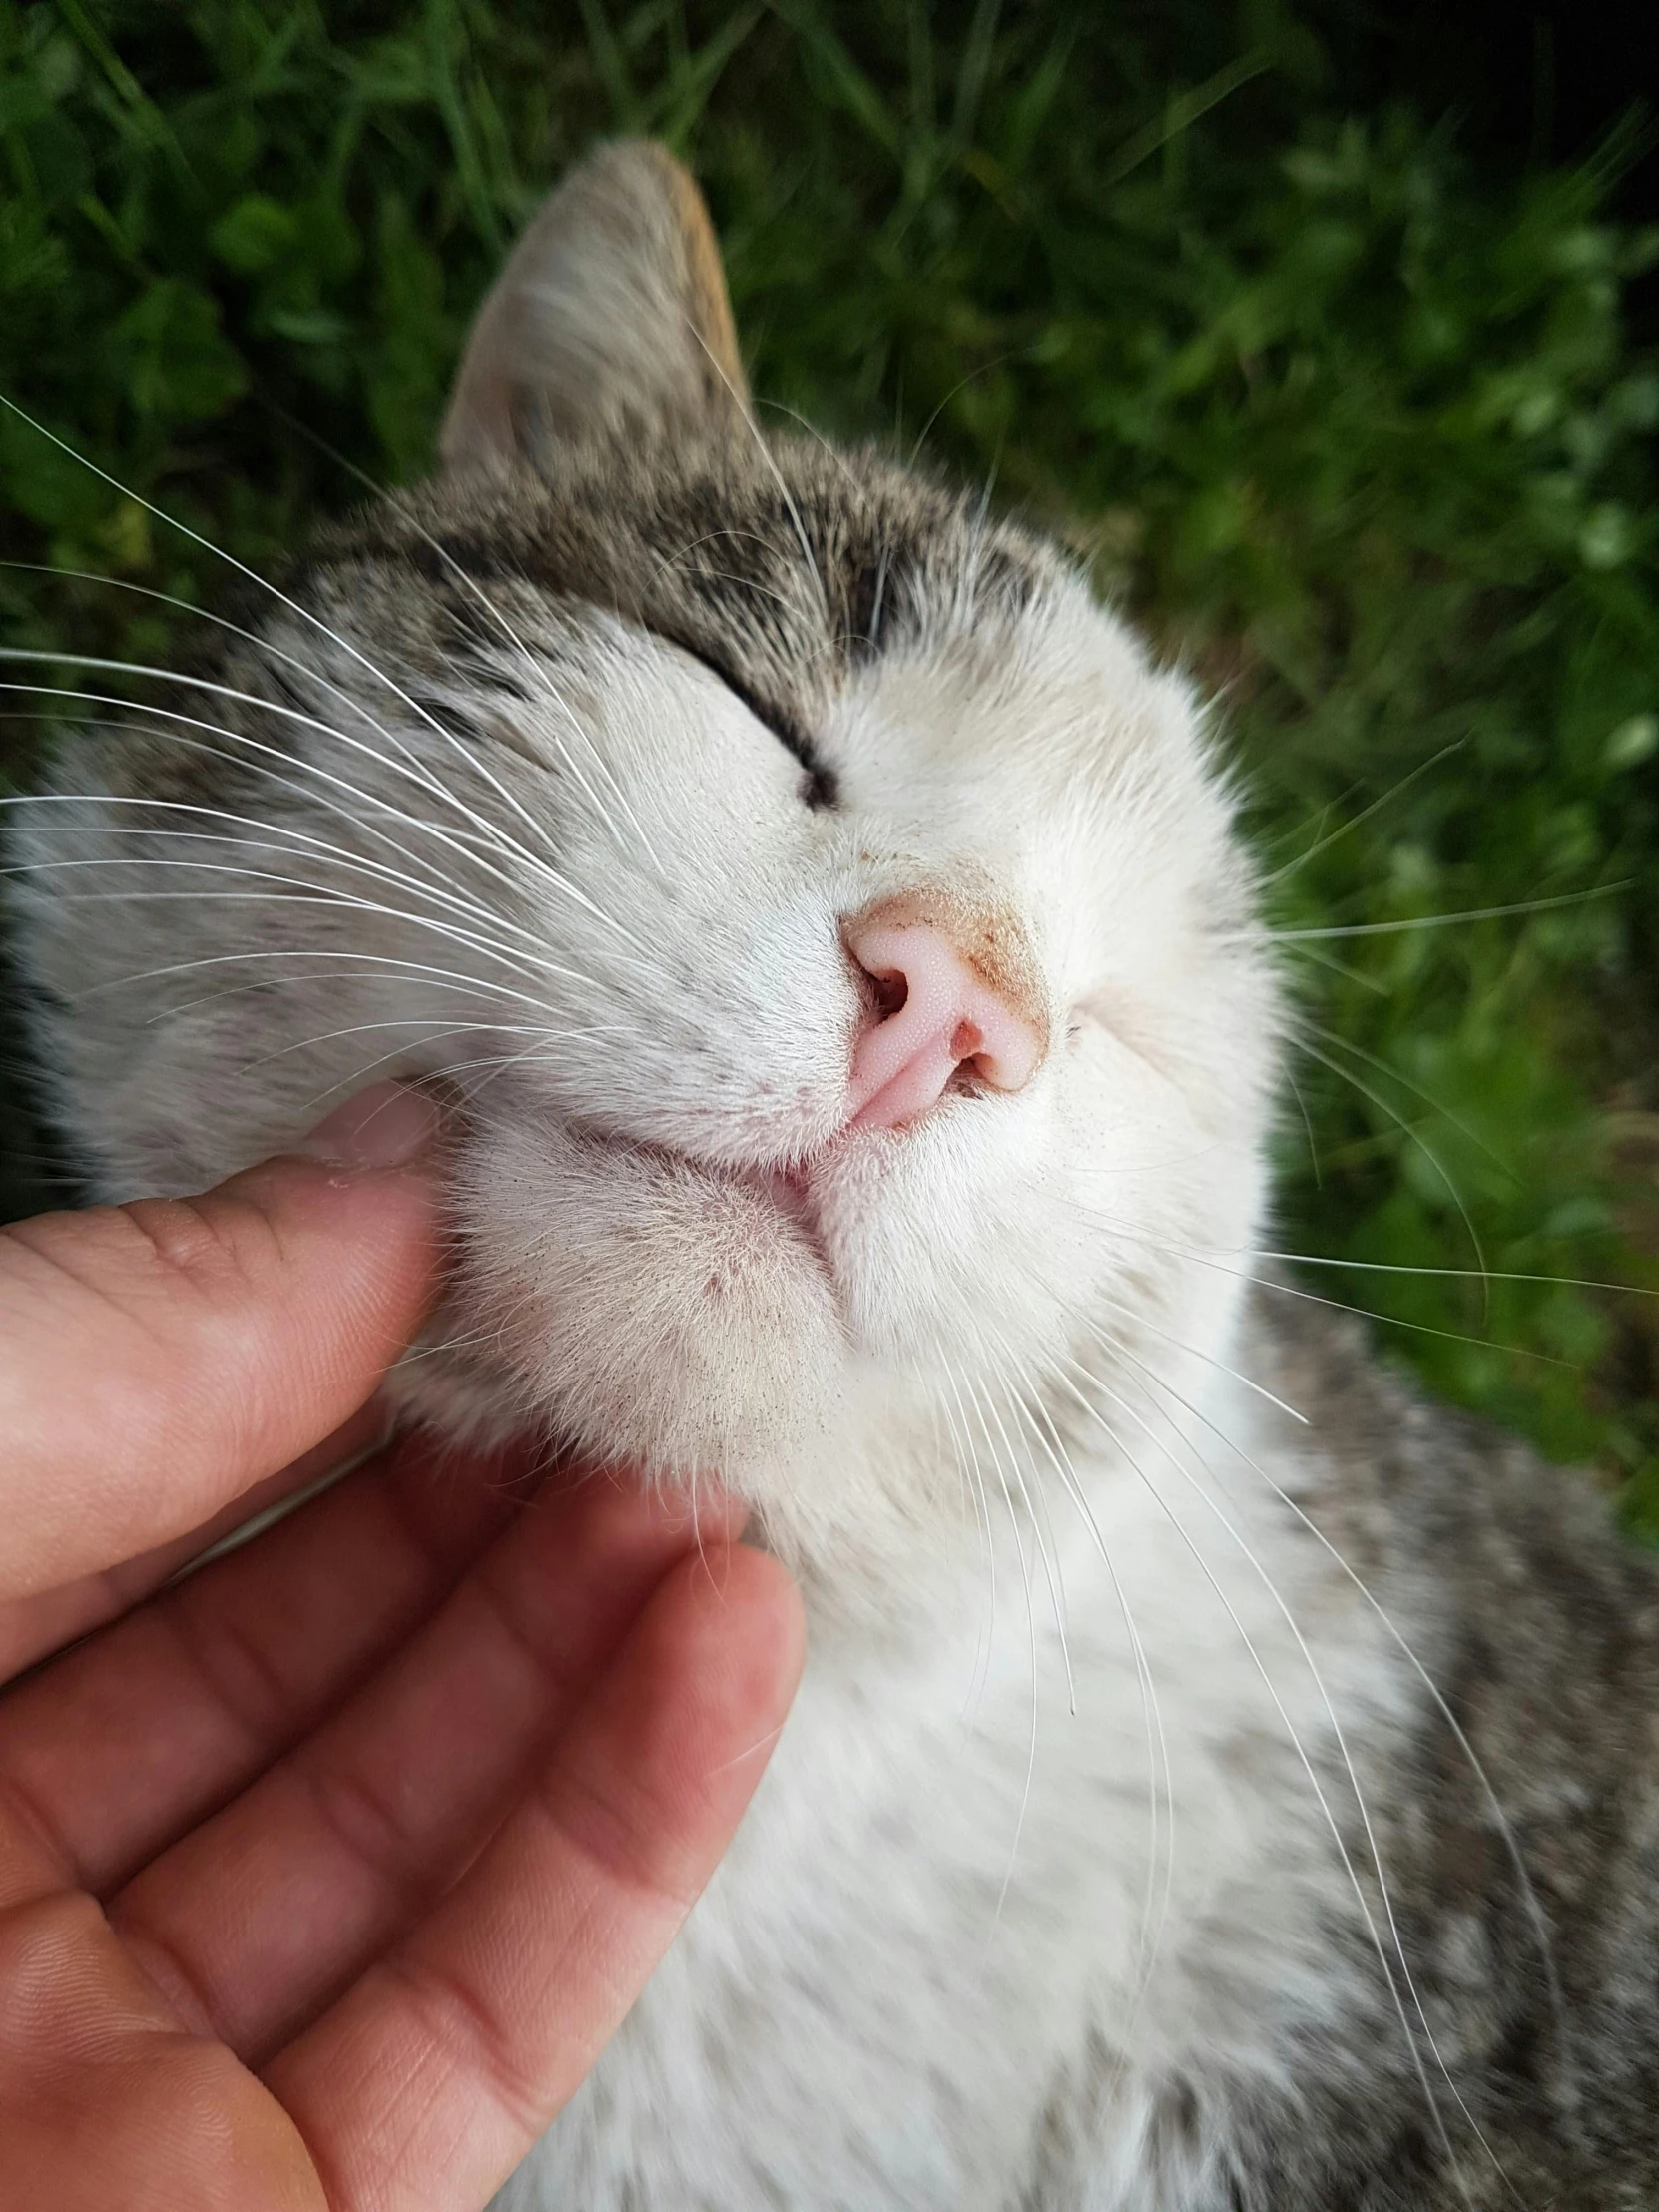 a person petting a cat's face outside